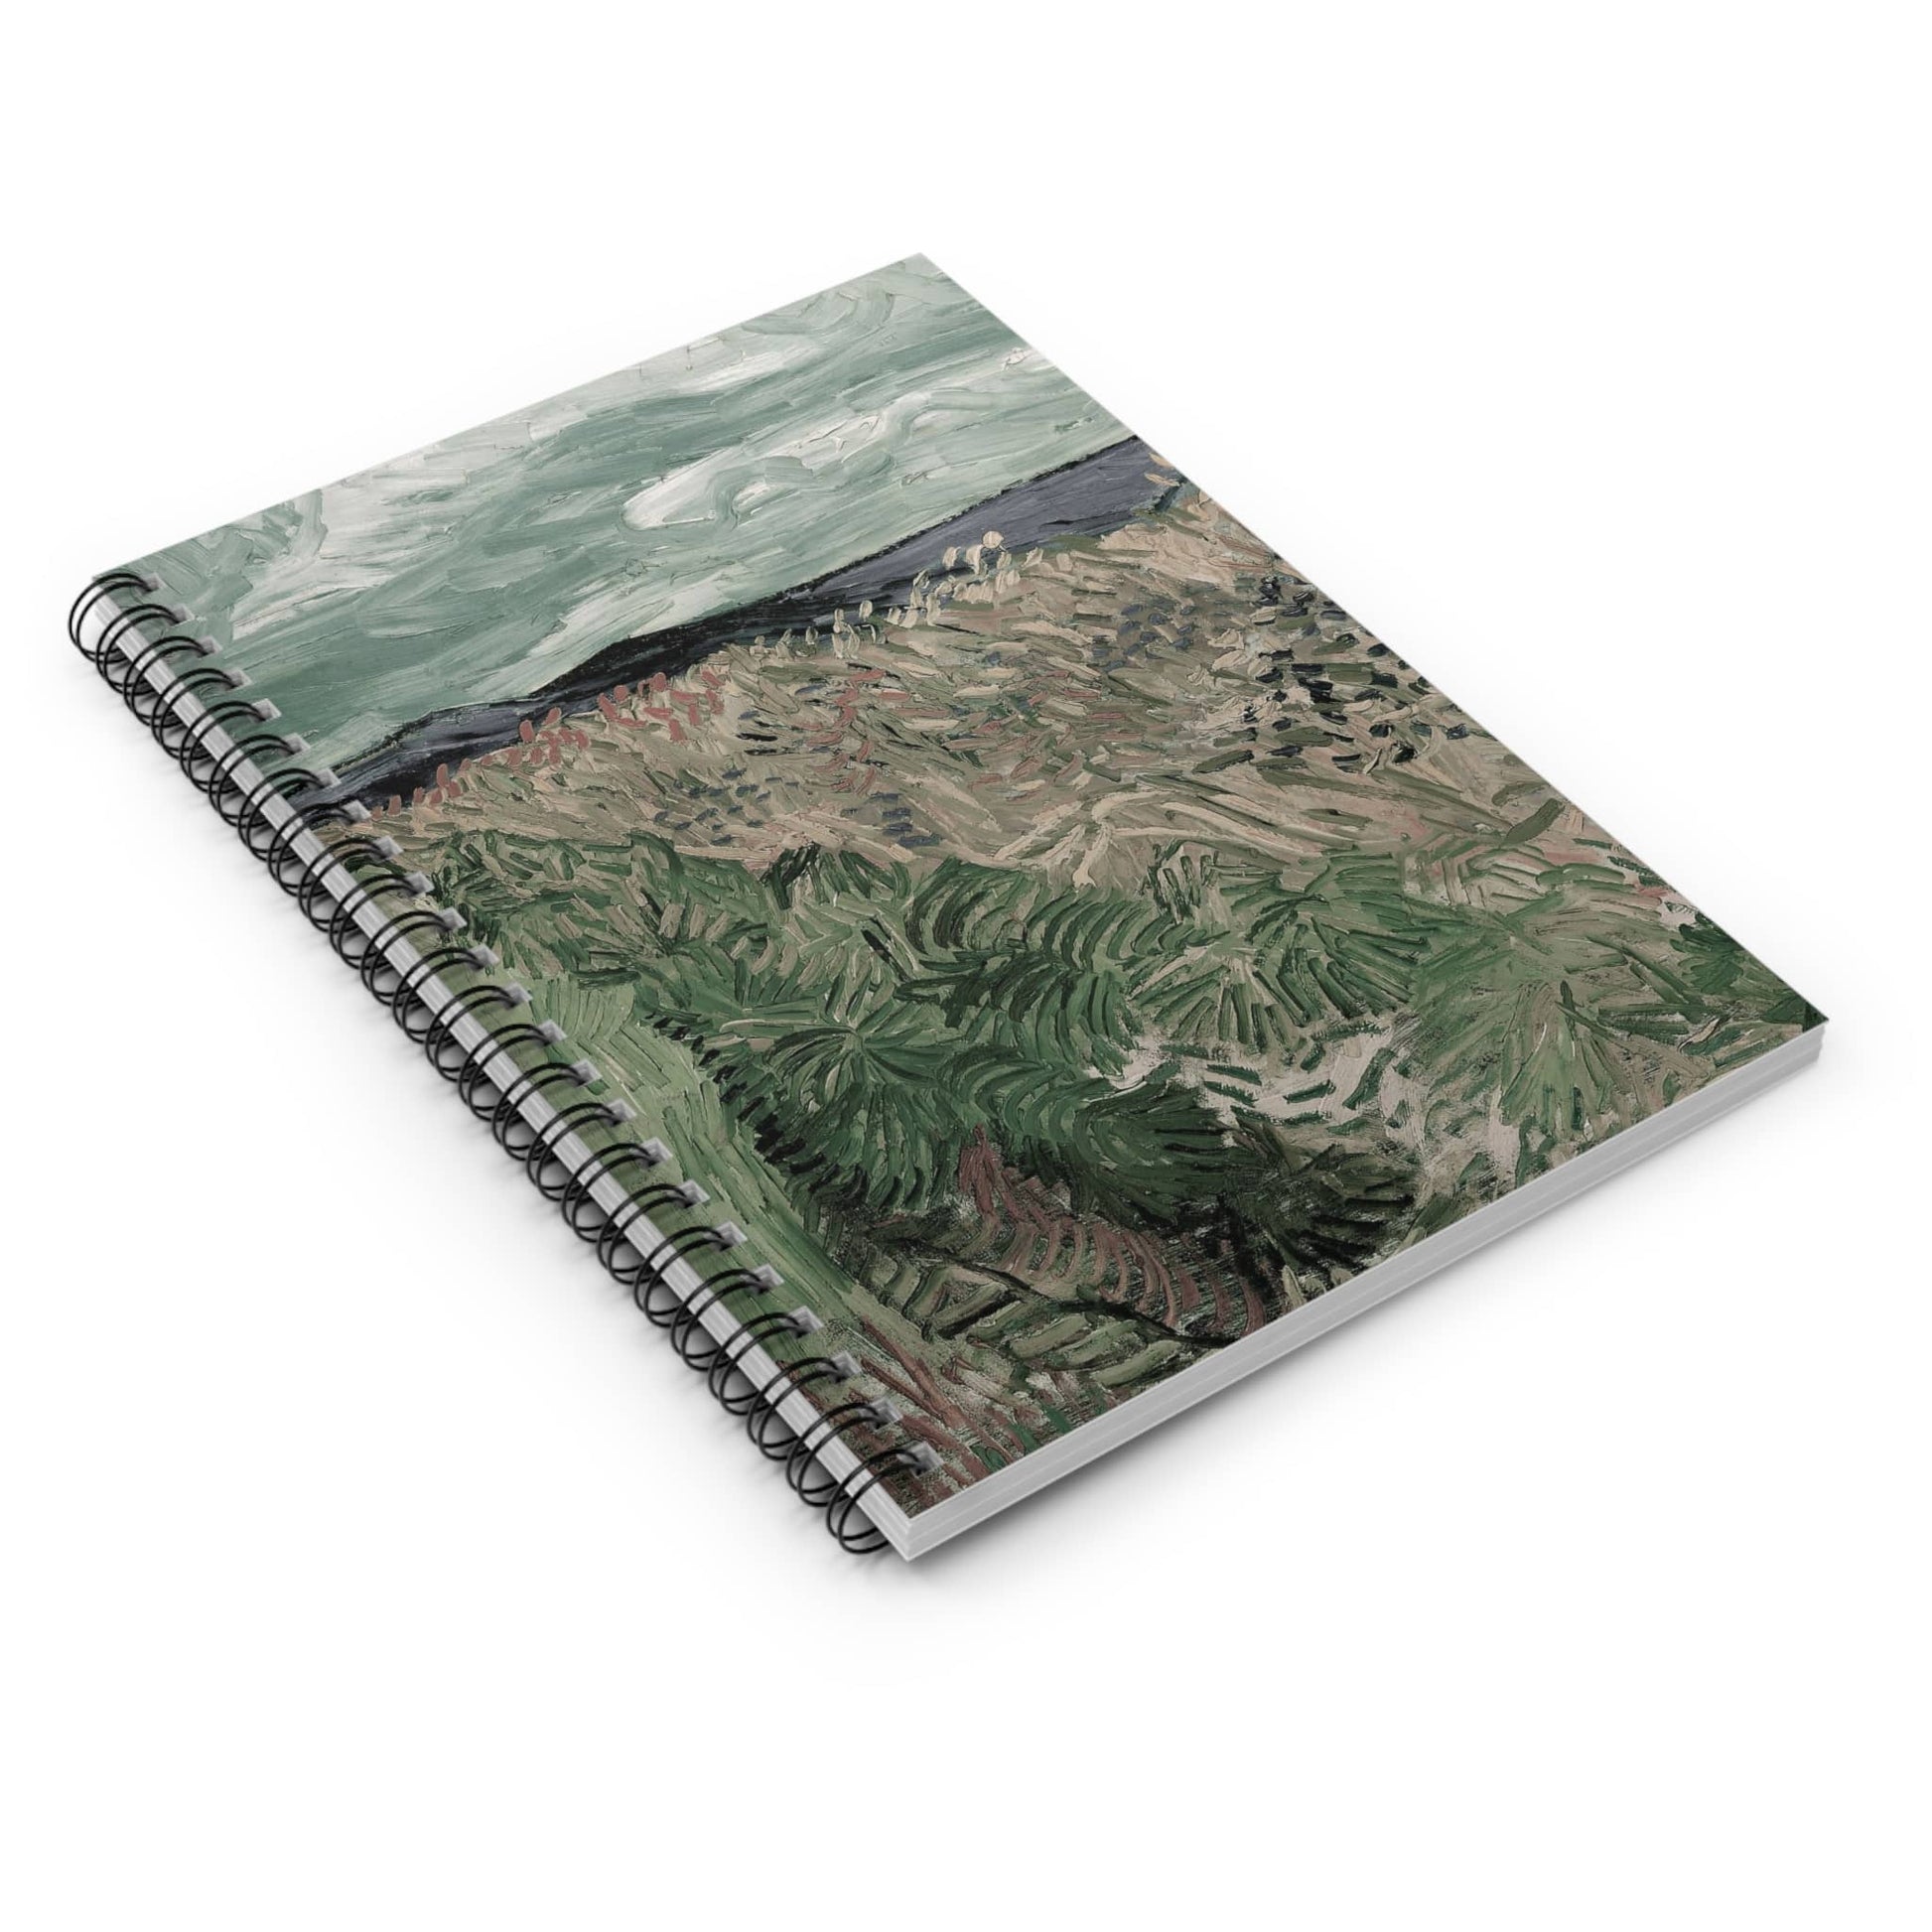 Revitalized Spiral Notebook Laying Flat on White Surface